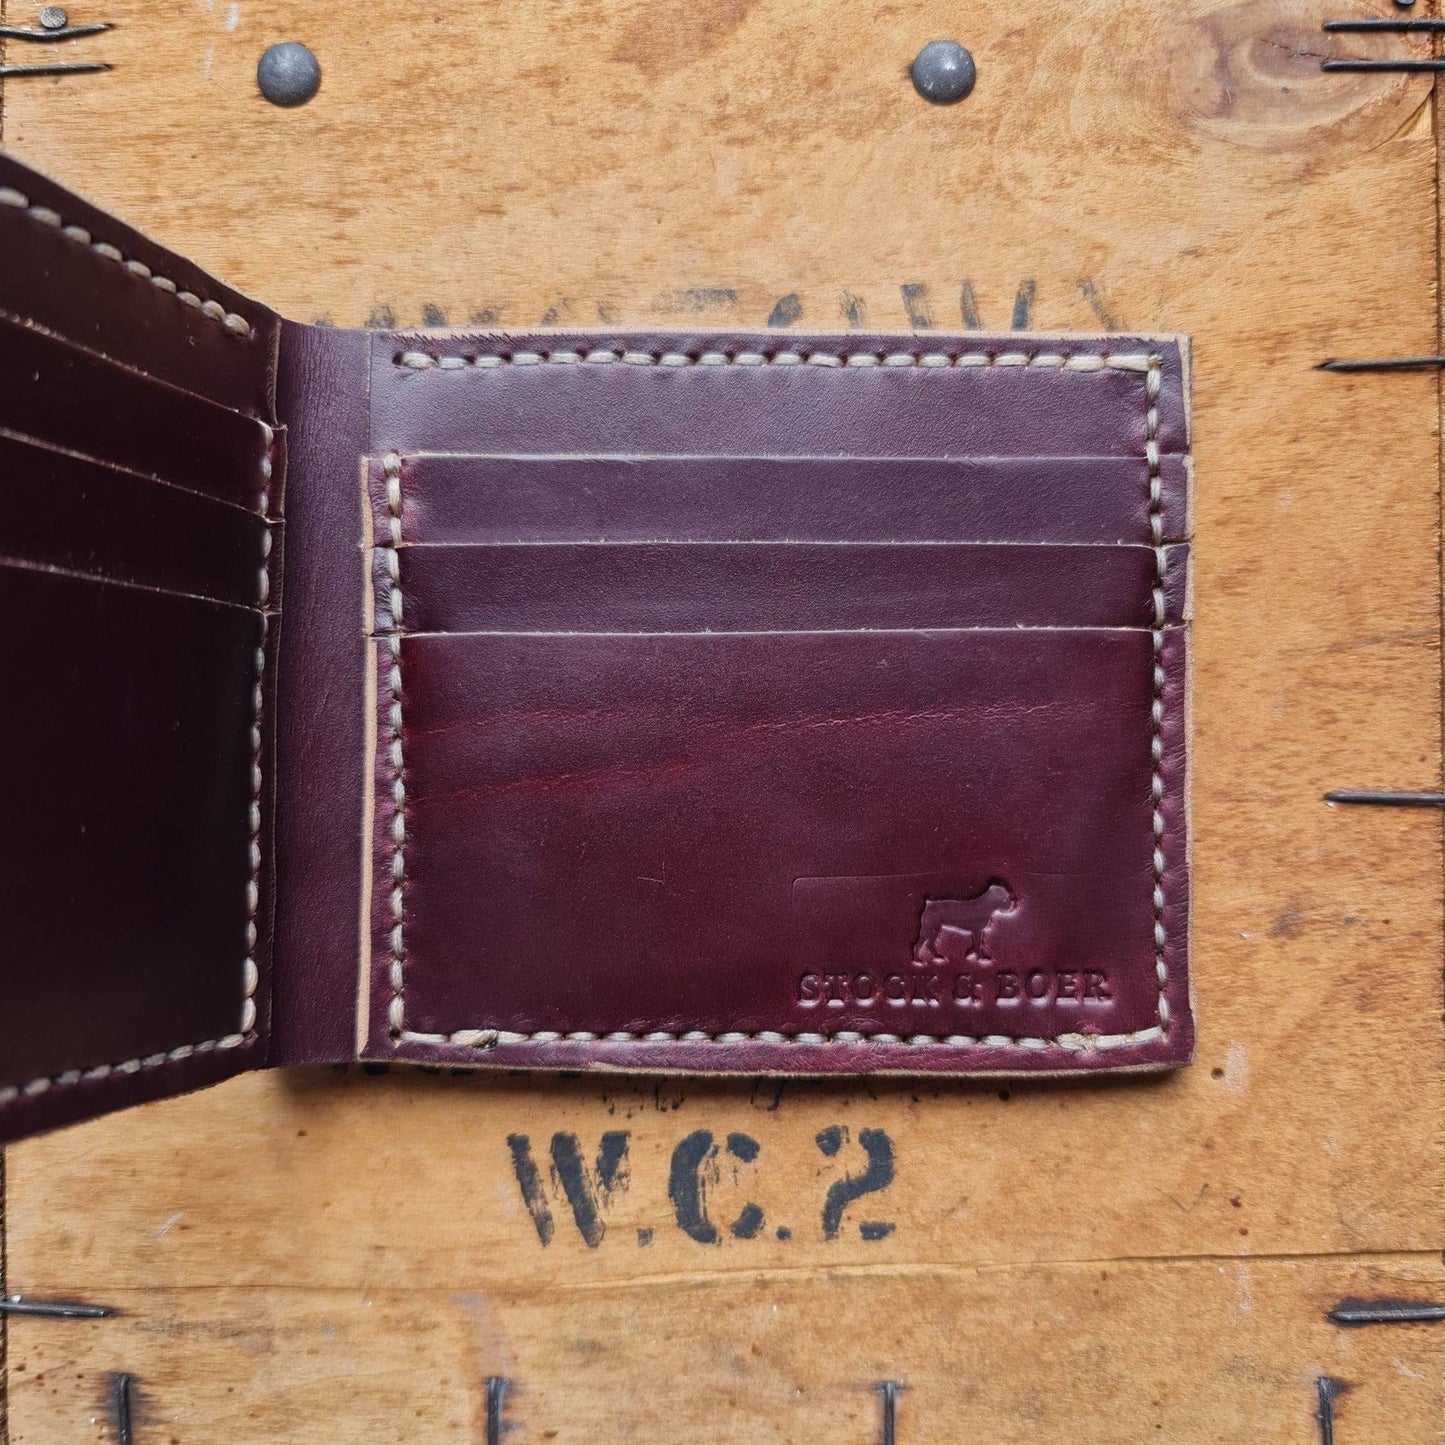 No. 1 Wrangler Card Holders, Horween Burgundy Chromexcel Leather, Open RIght